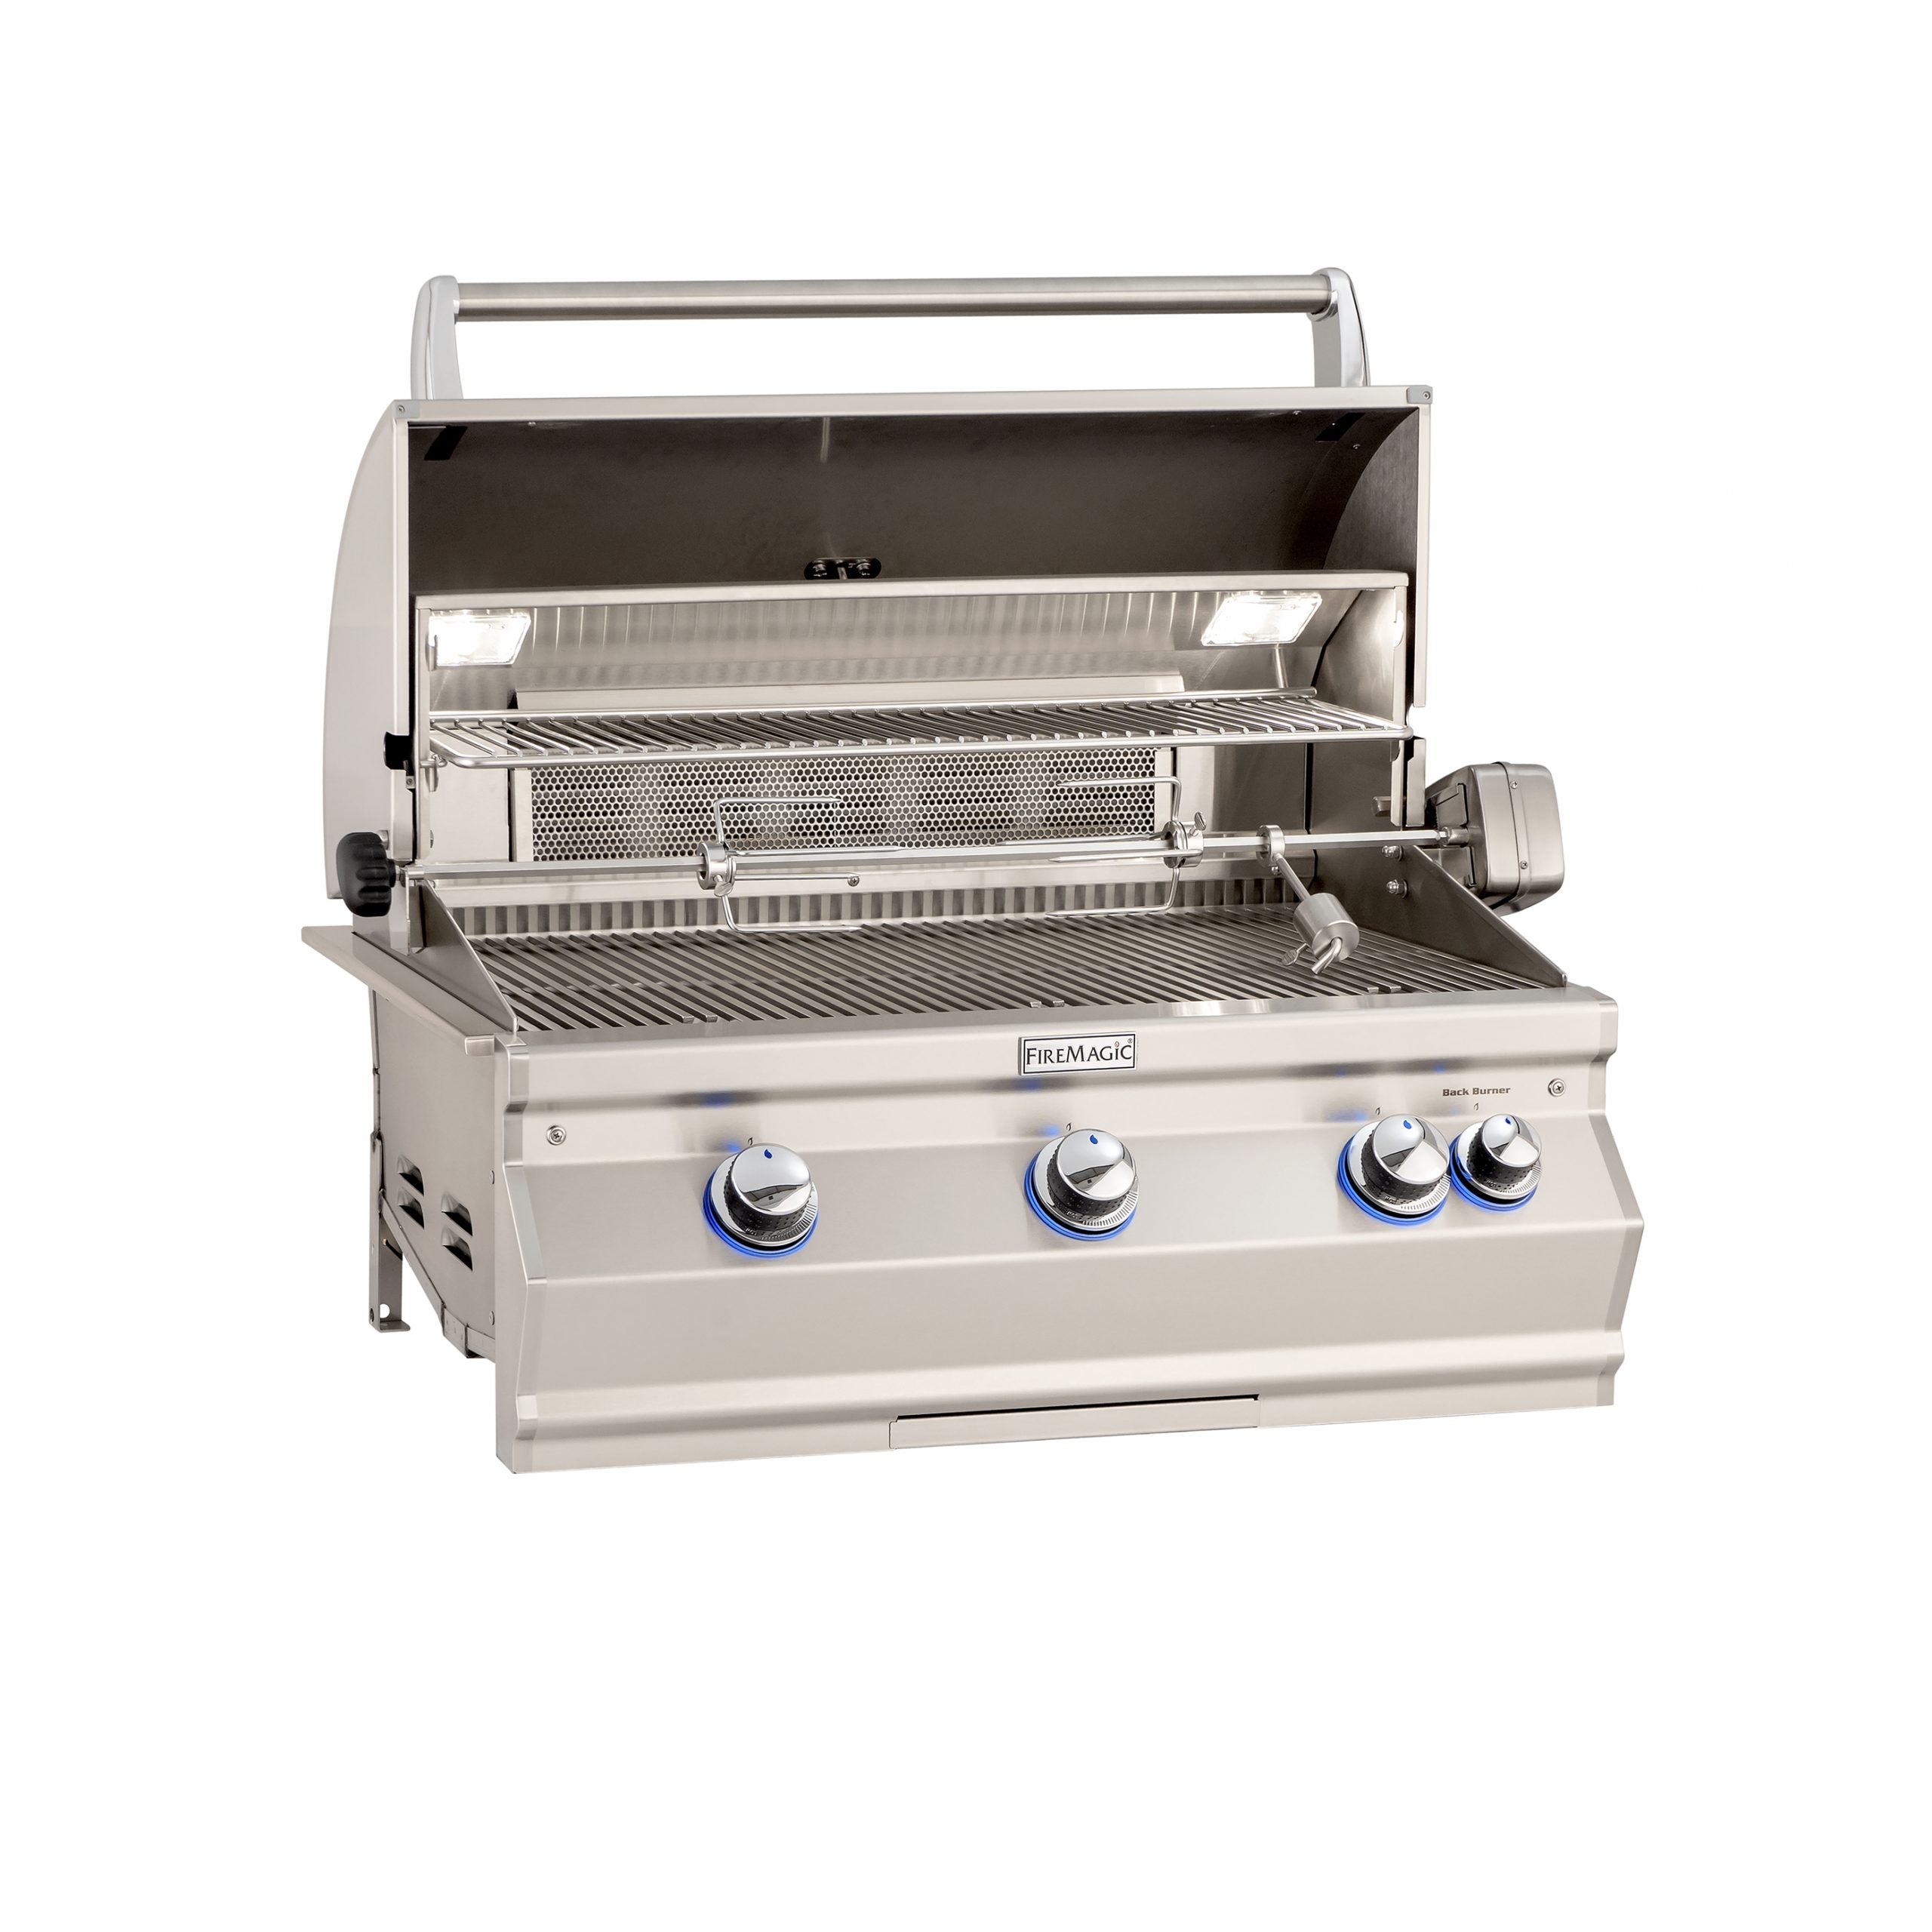 Fire Magic Aurora A540i Built-In Grill - Analog Thermometer Without Rotisserie Back Burner